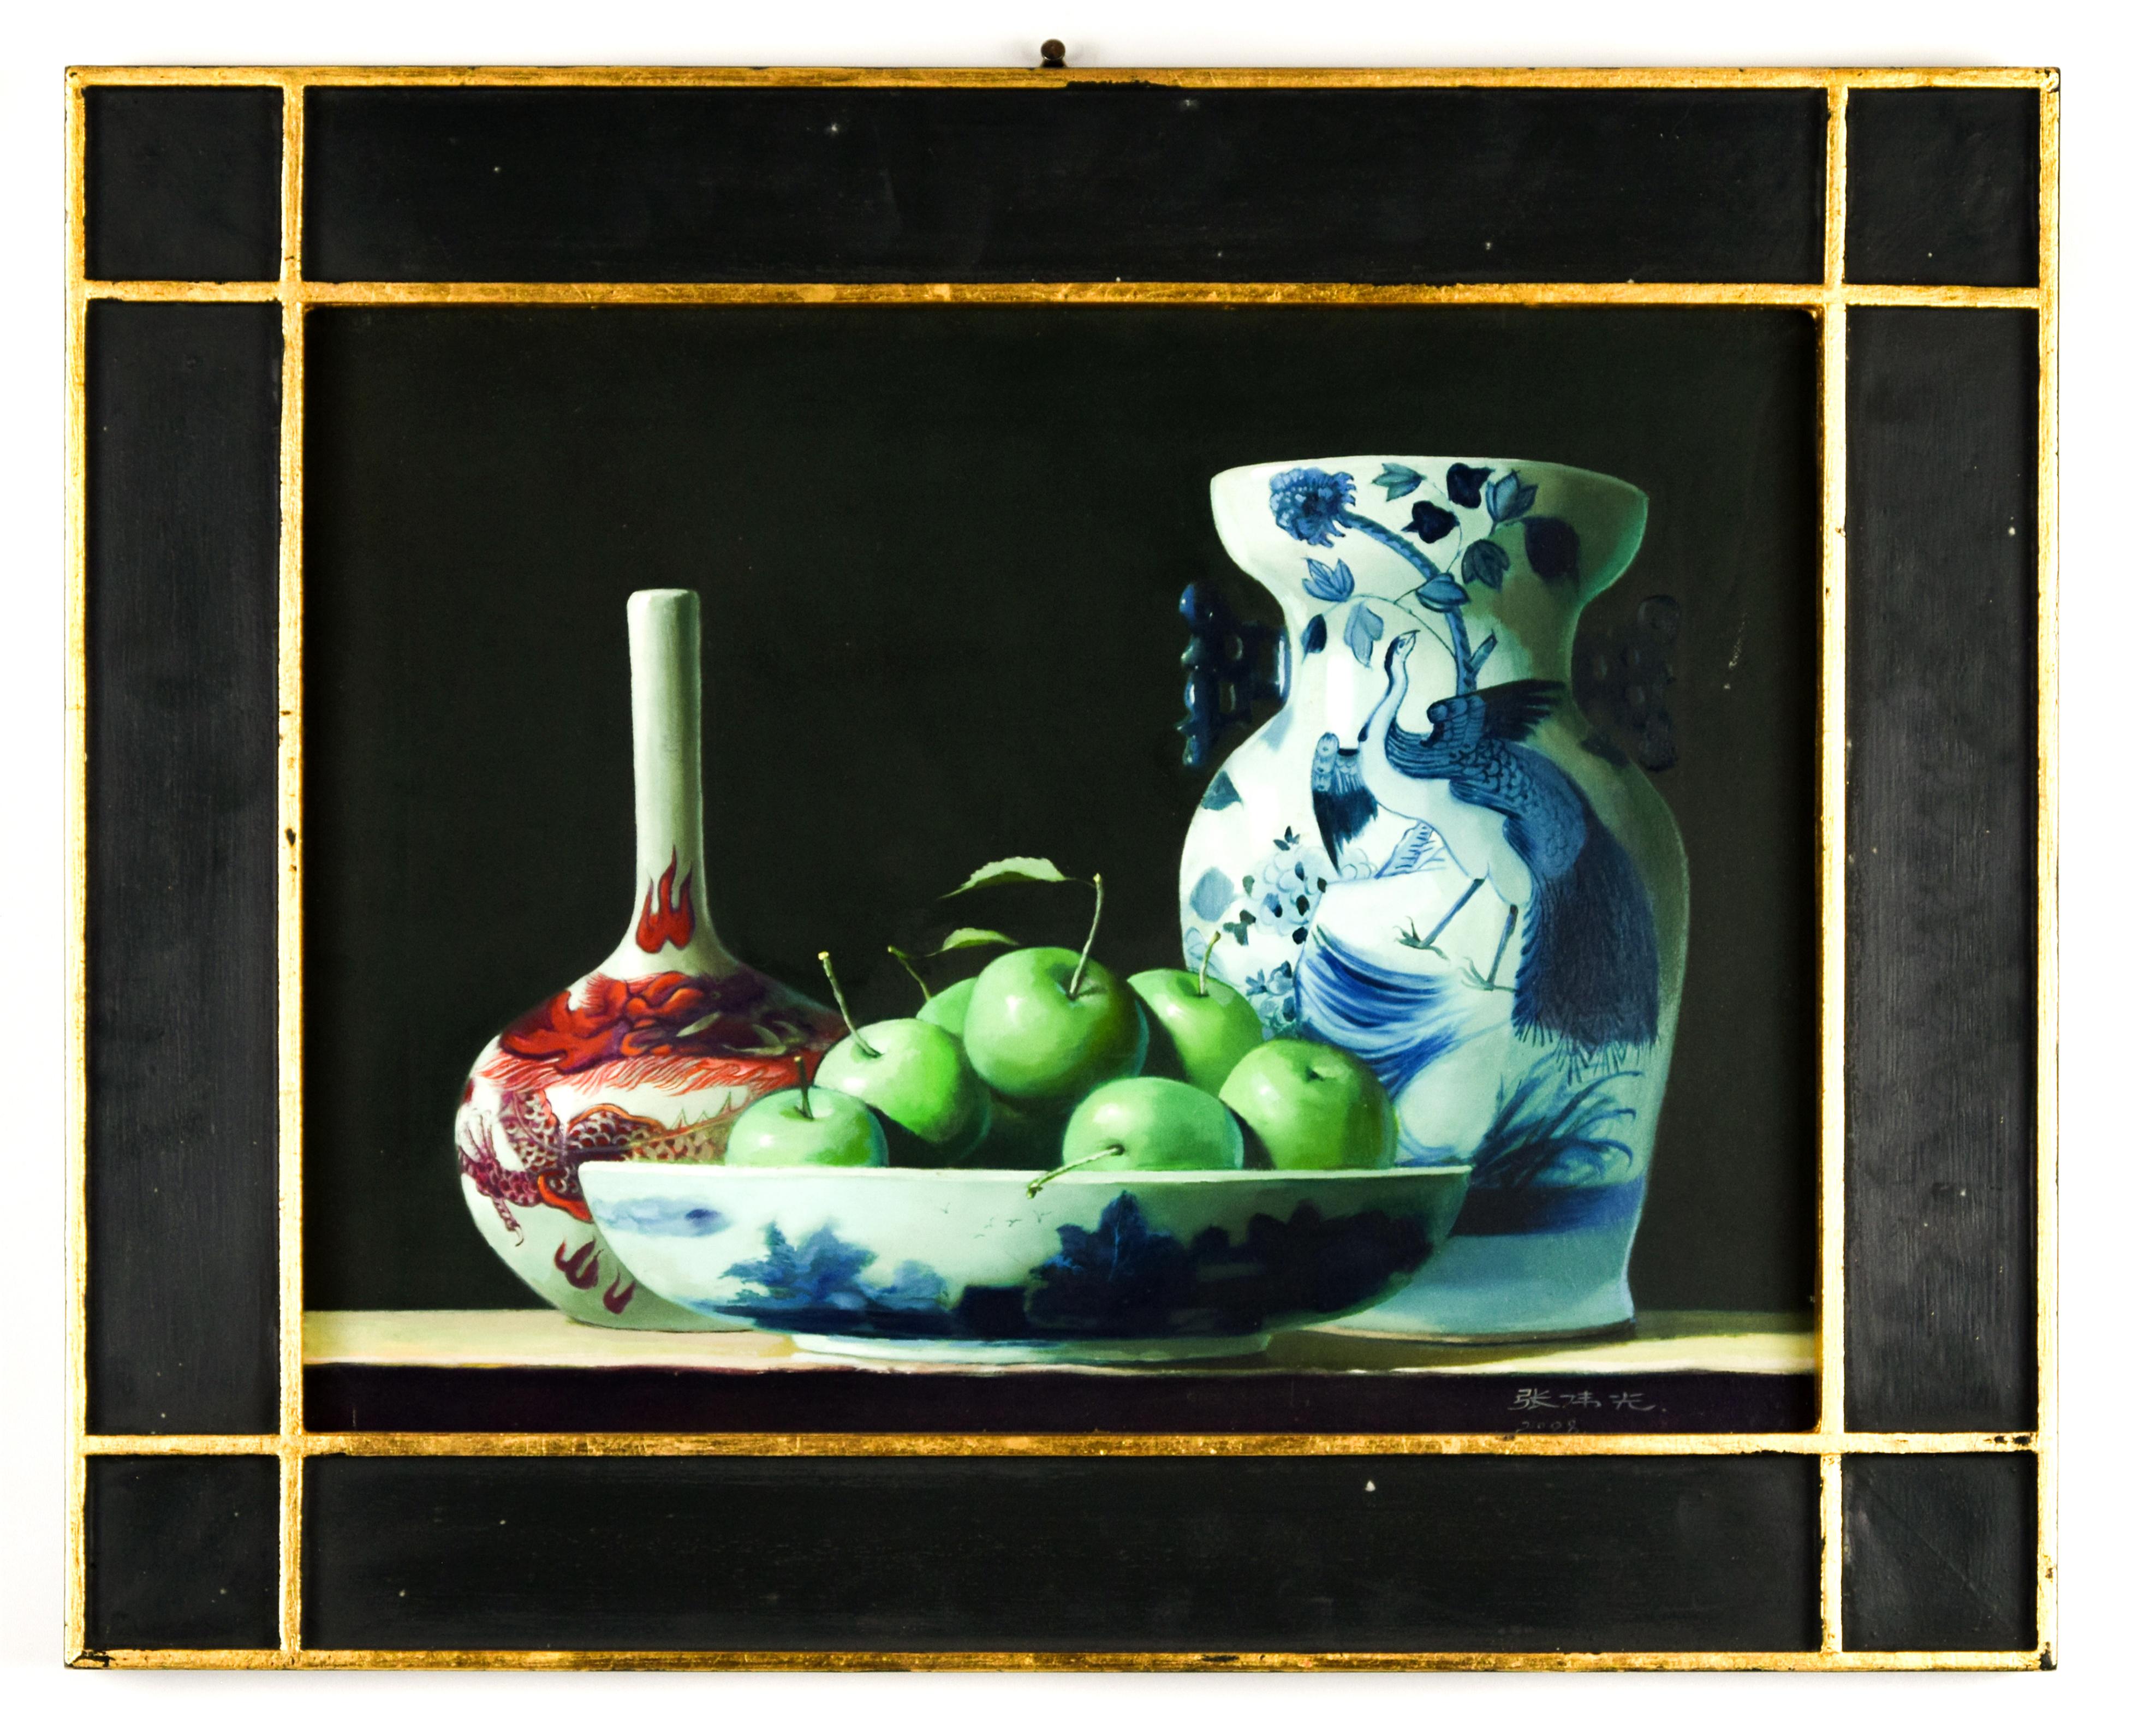 Still-Life Painting Zhang Wei Guang - Nature morte - Huile sur toile - 2008